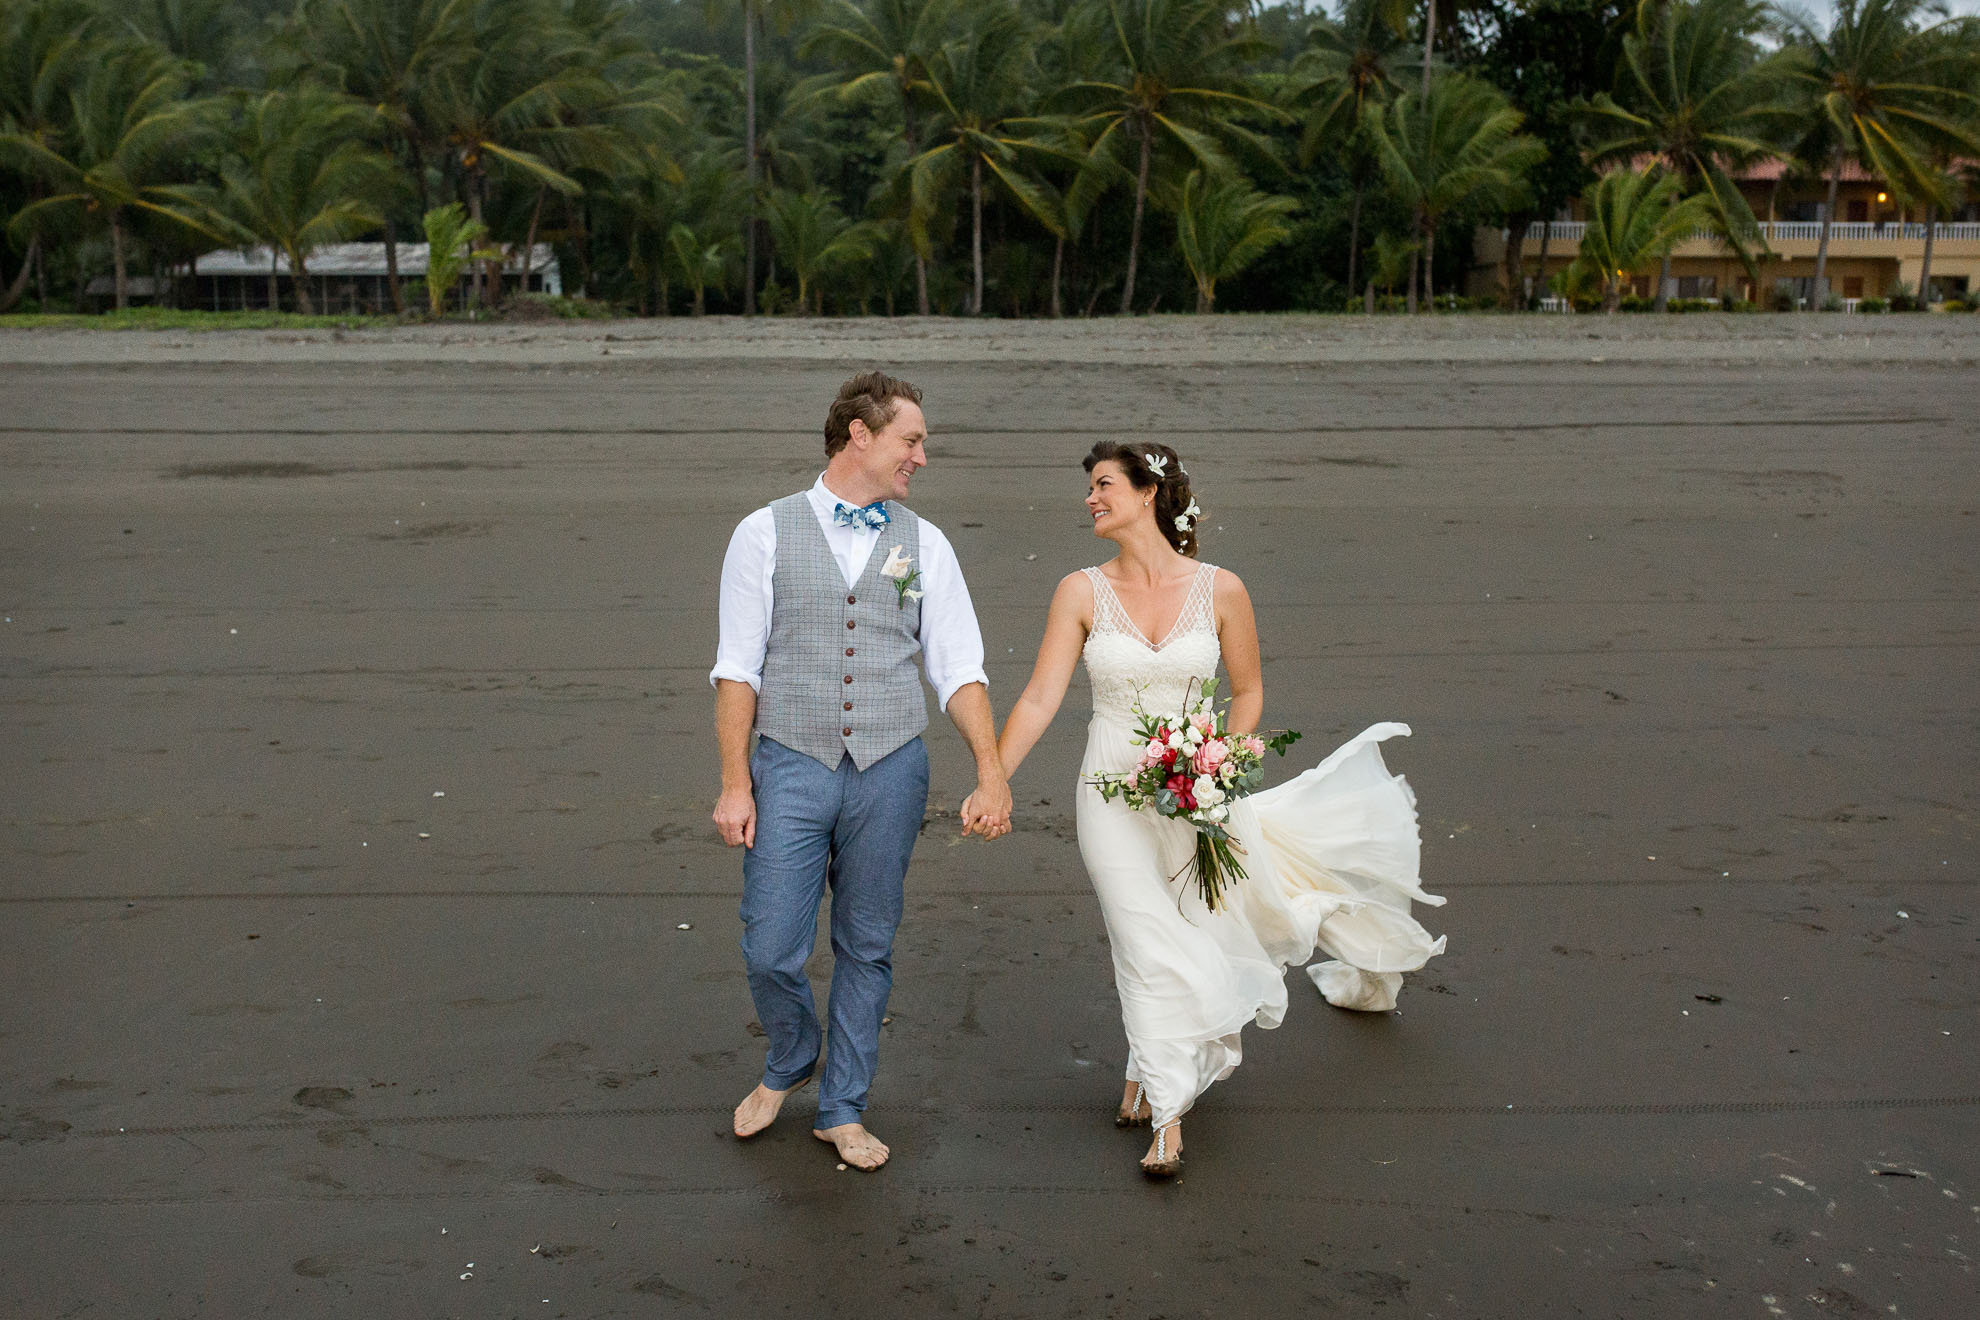 Bridal portraits on one of the best Jaco beaches in Costa Rica!